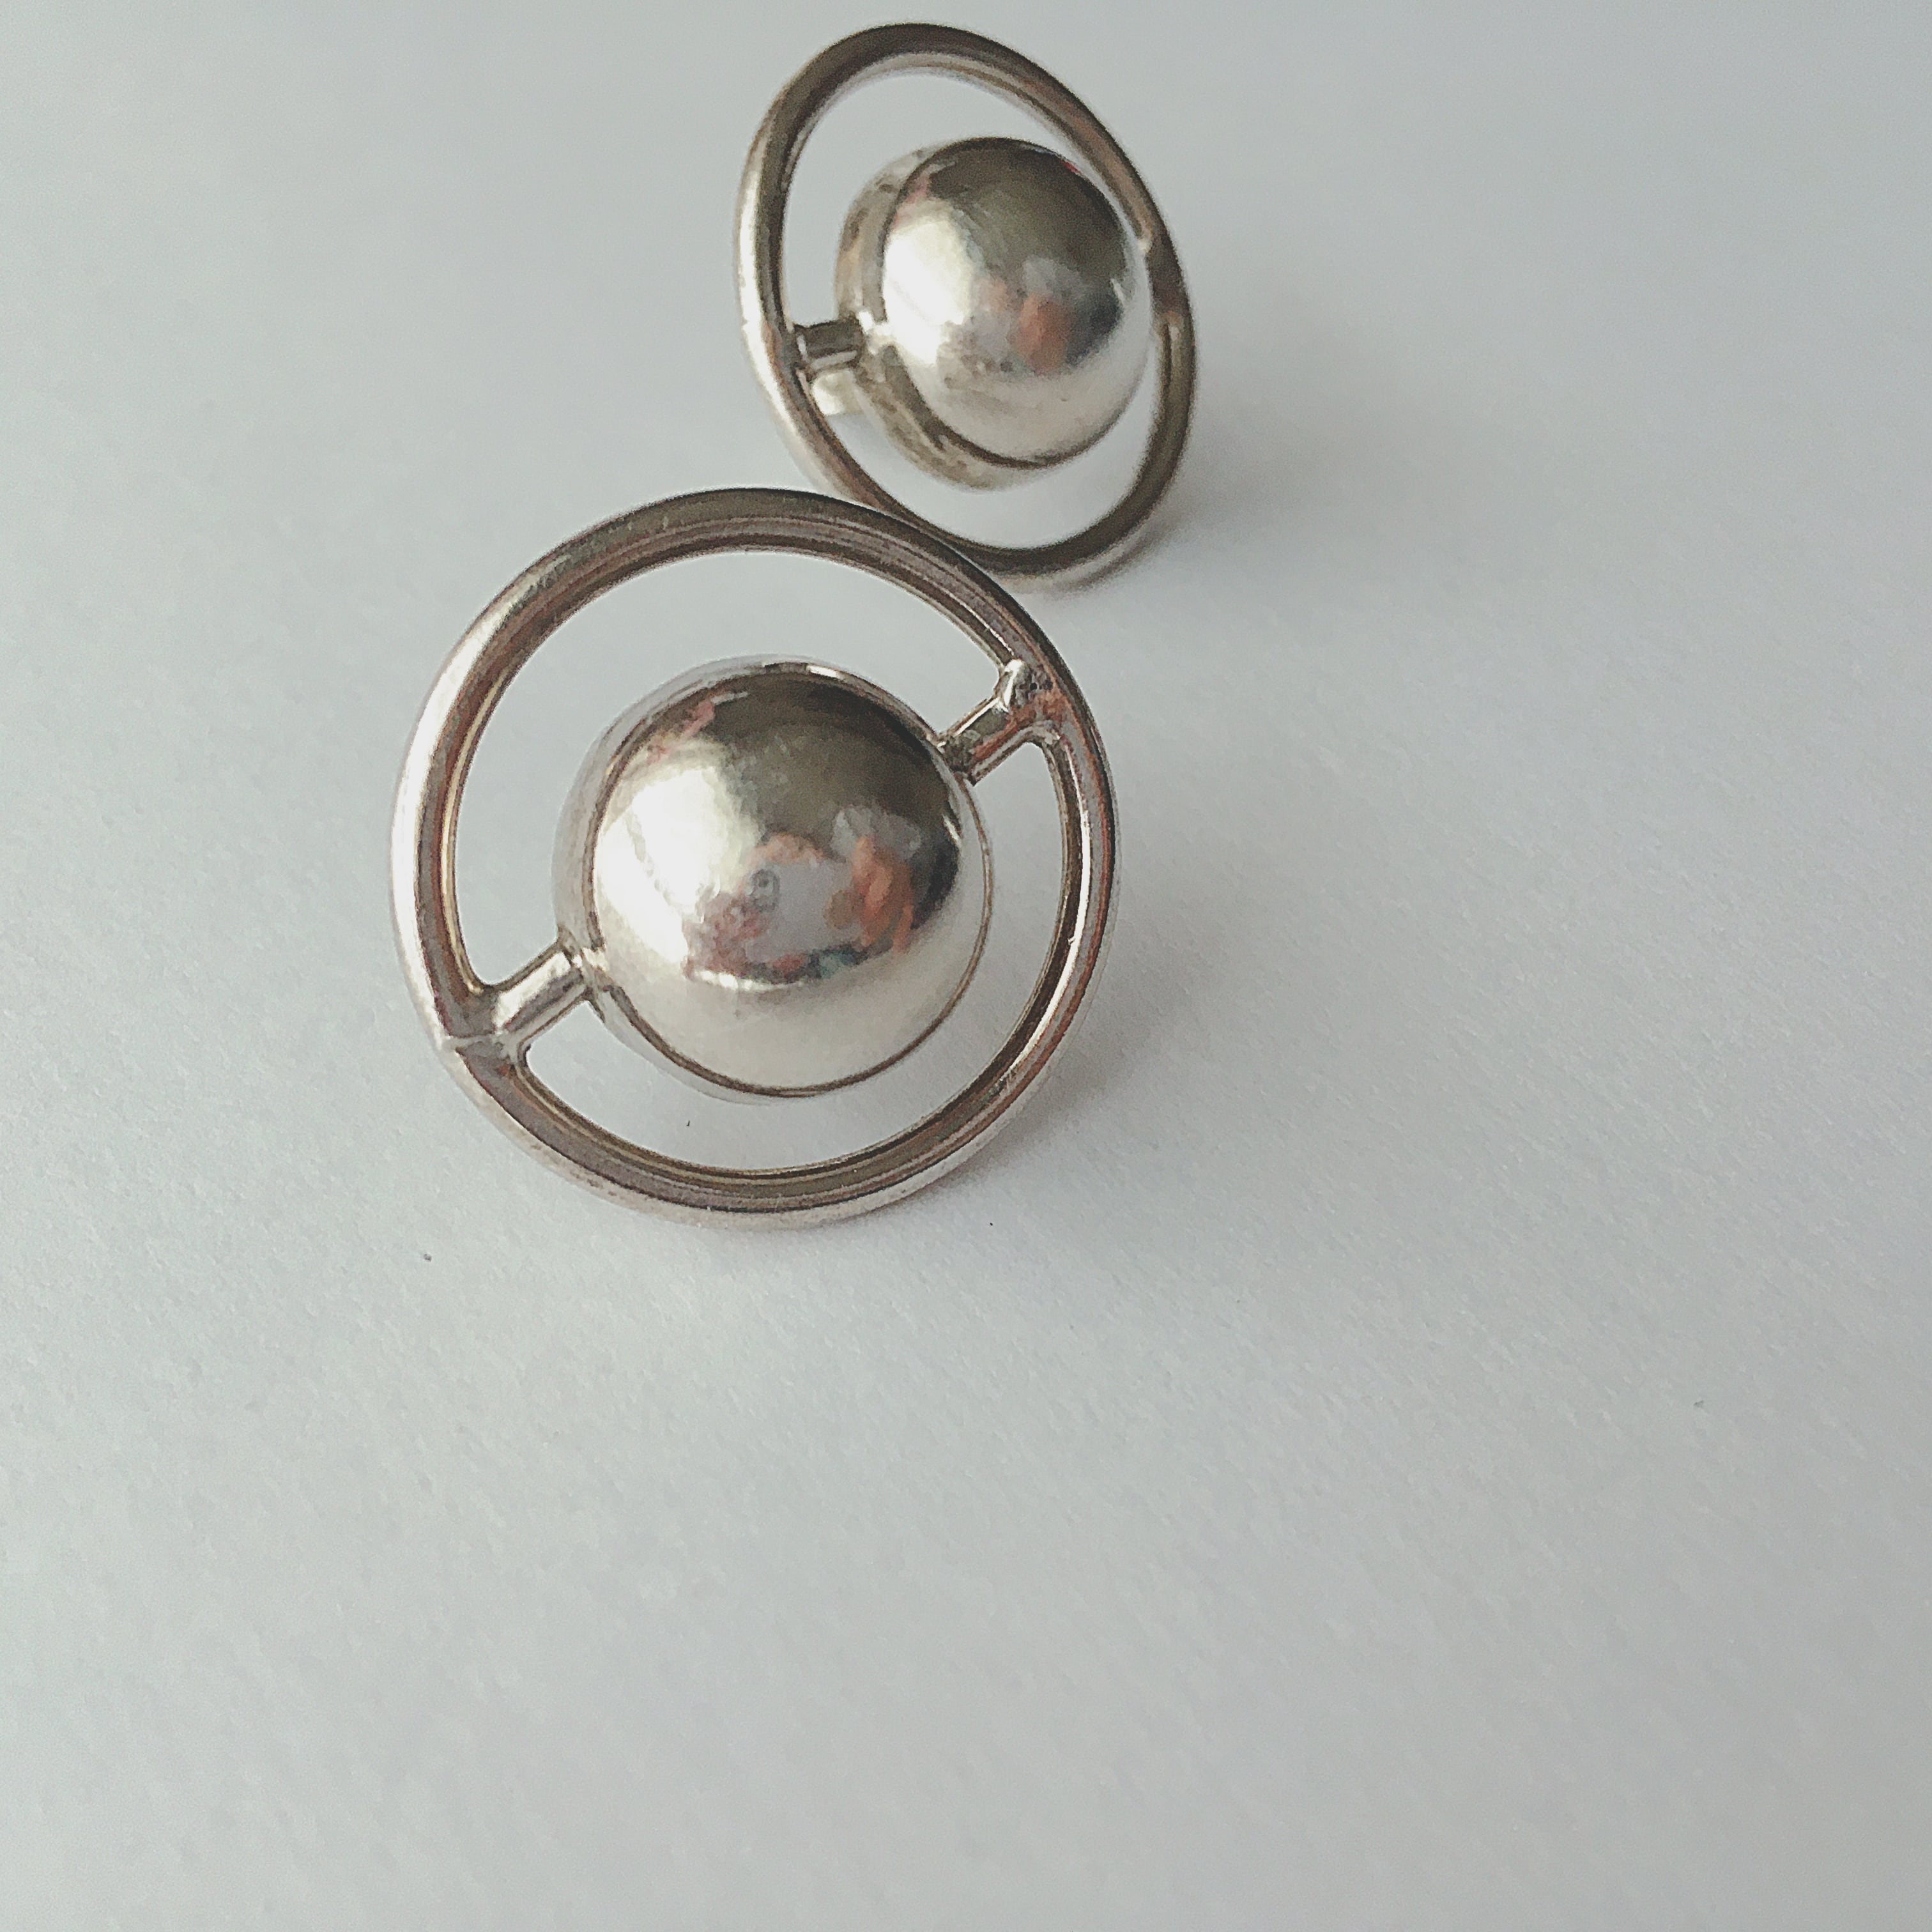 Vintage Mexico 925 sterling silver earrings ヴィンテージ メキシコ製